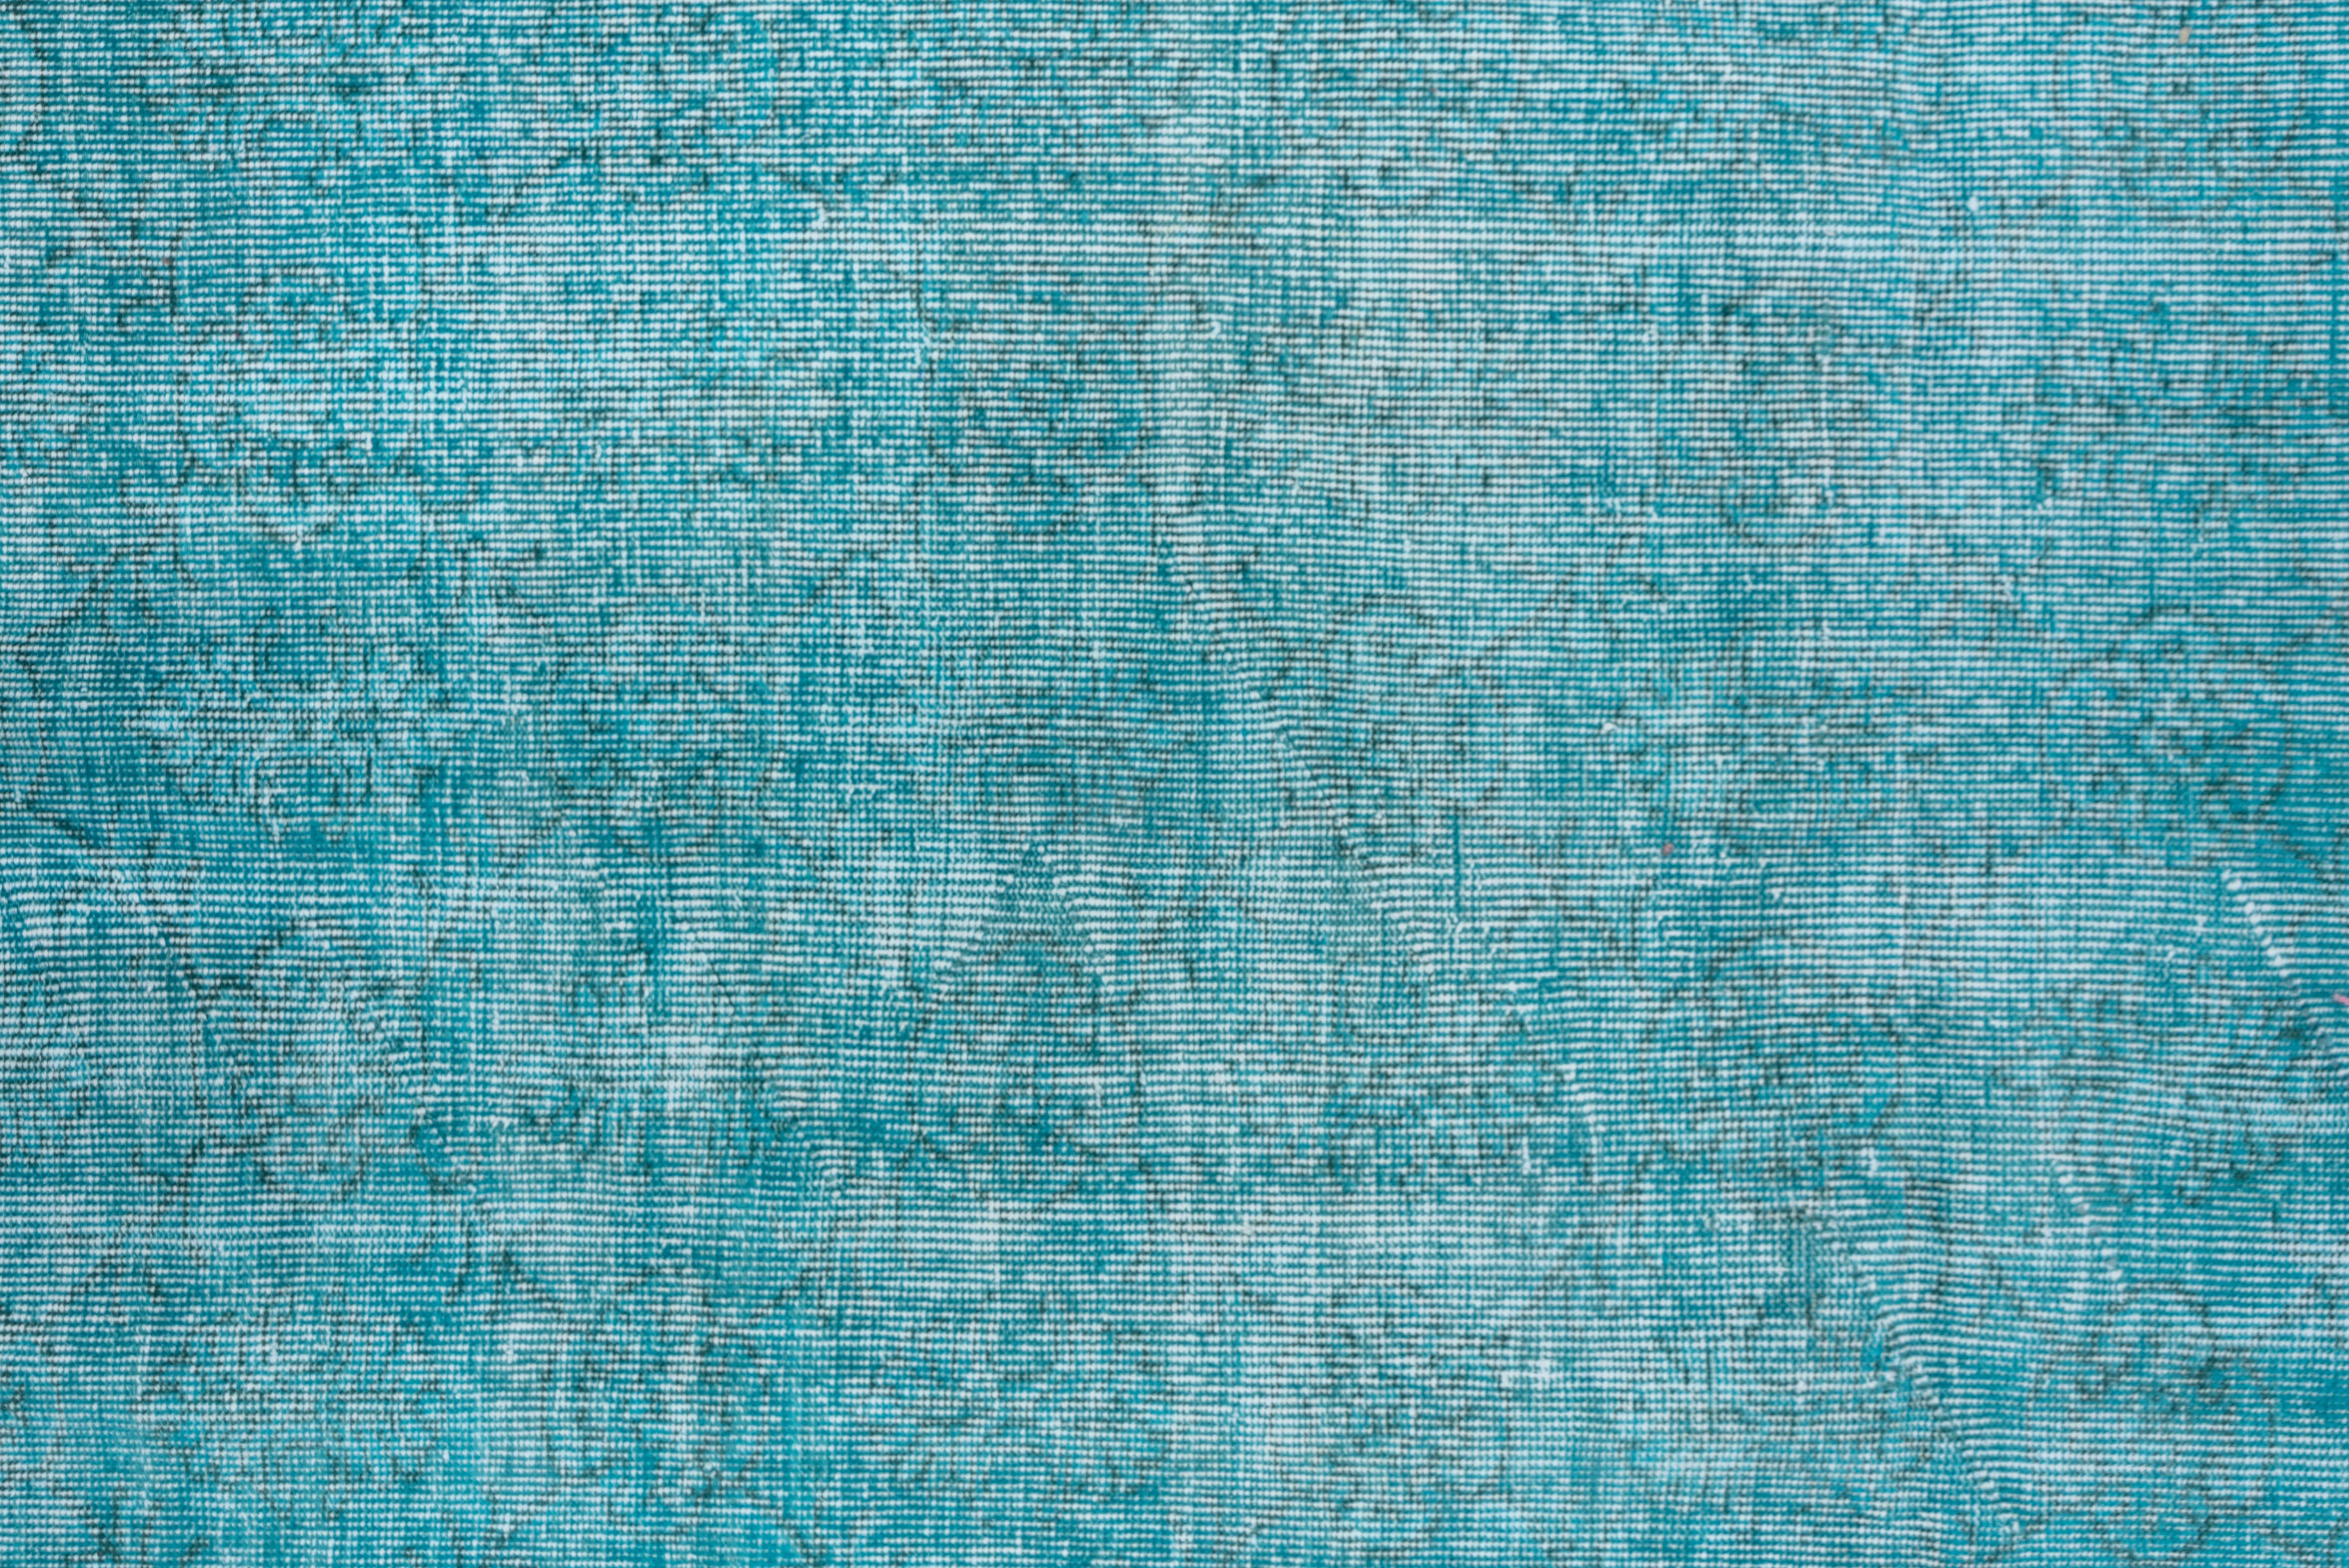 This bright turquoise Turkish overdyed carpet has a pattern defined by the wear beyond the all-over general distress. Vertical and horizontal off white strips cross near the center. Shabby chic conditions and can offer some great texture for floor